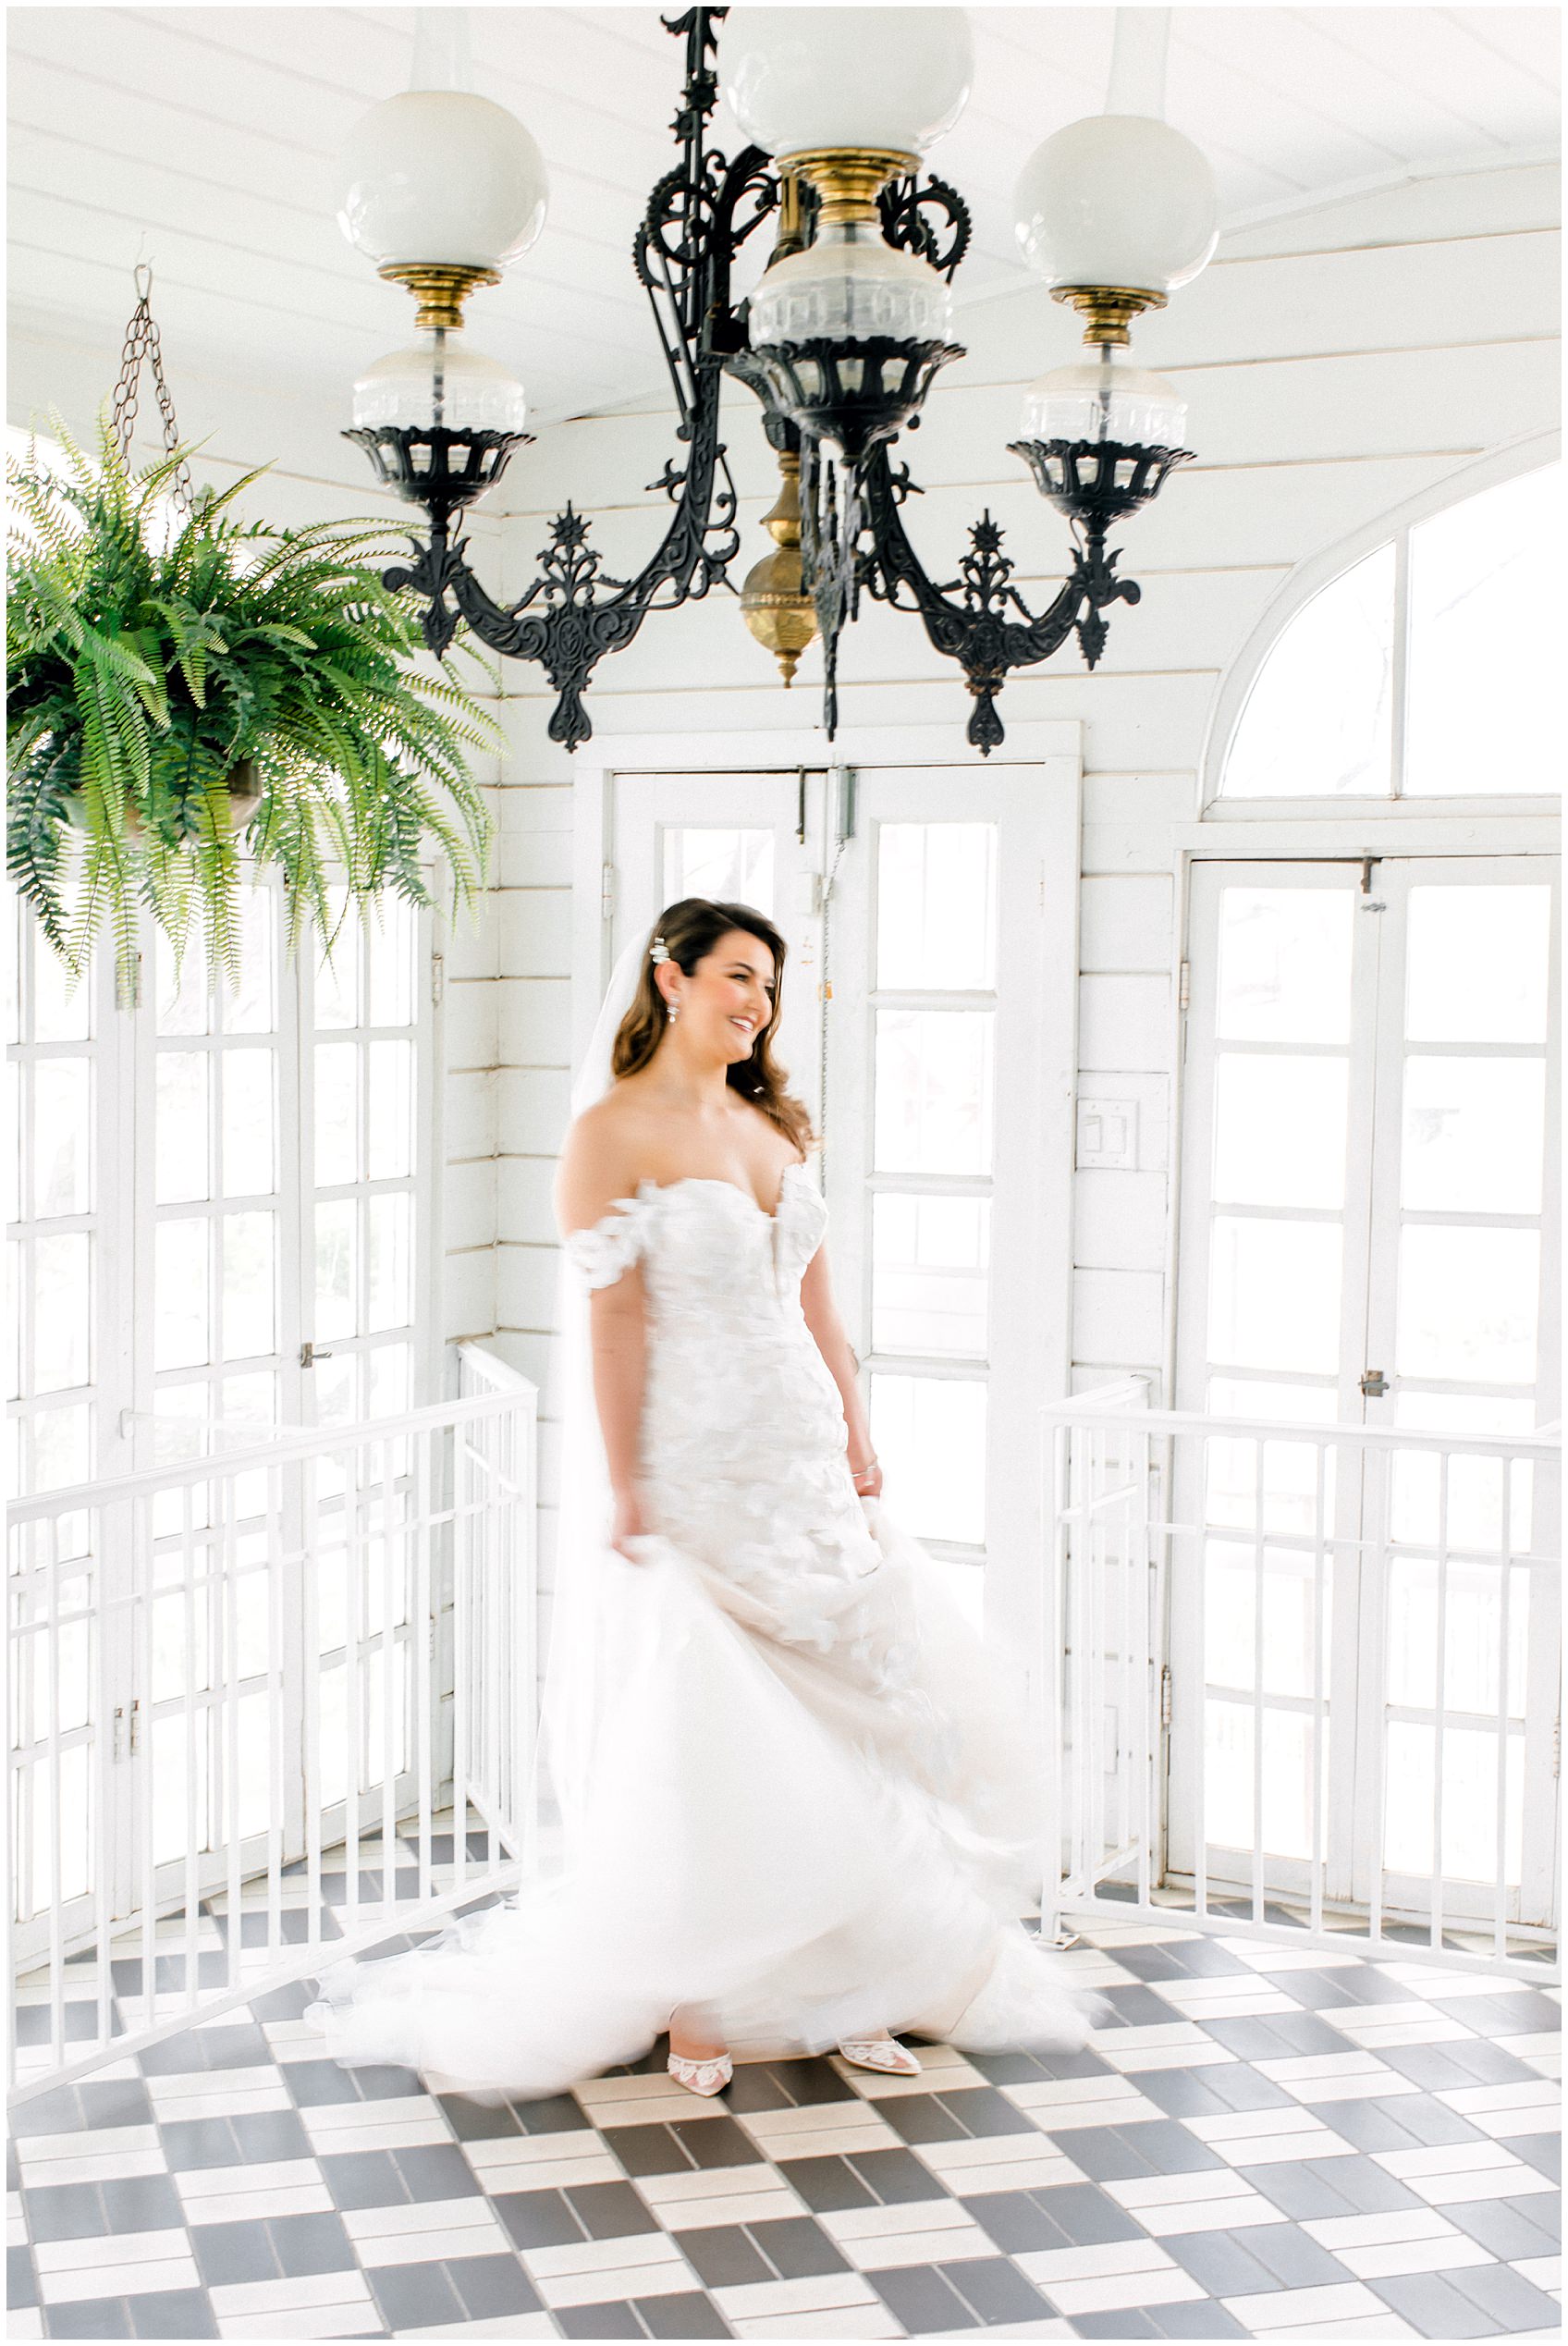 Woodbine Mansion Spring Bridal wedding Photos by Allison Jeffers Photography 0013